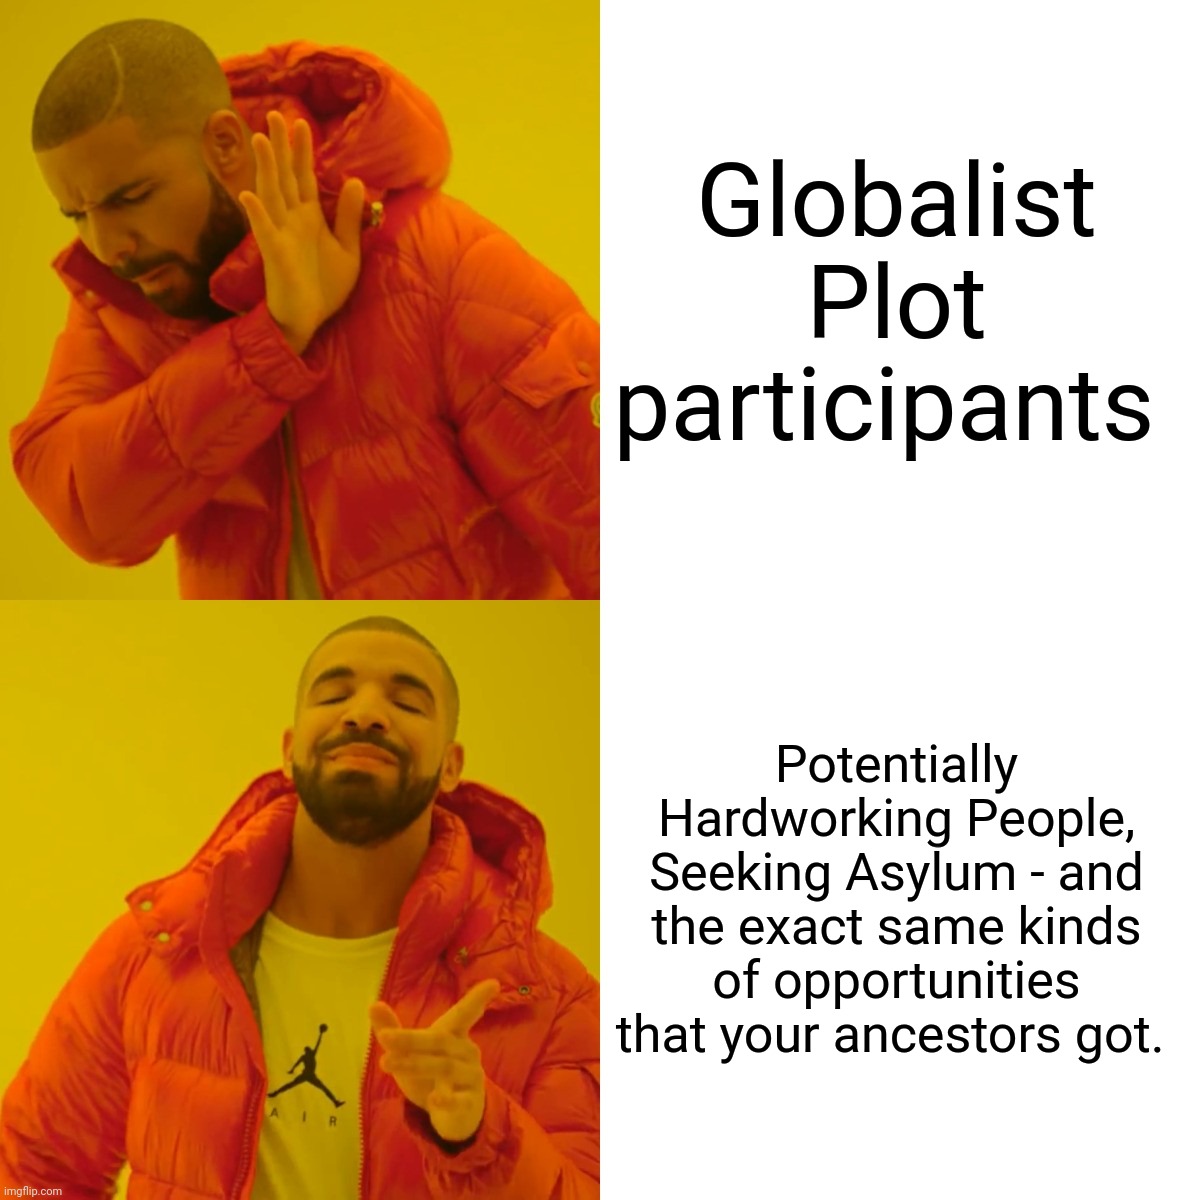 Drake Hotline Bling Meme | Globalist Plot participants Potentially Hardworking People, Seeking Asylum - and the exact same kinds of opportunities that your ancestors g | image tagged in memes,drake hotline bling | made w/ Imgflip meme maker